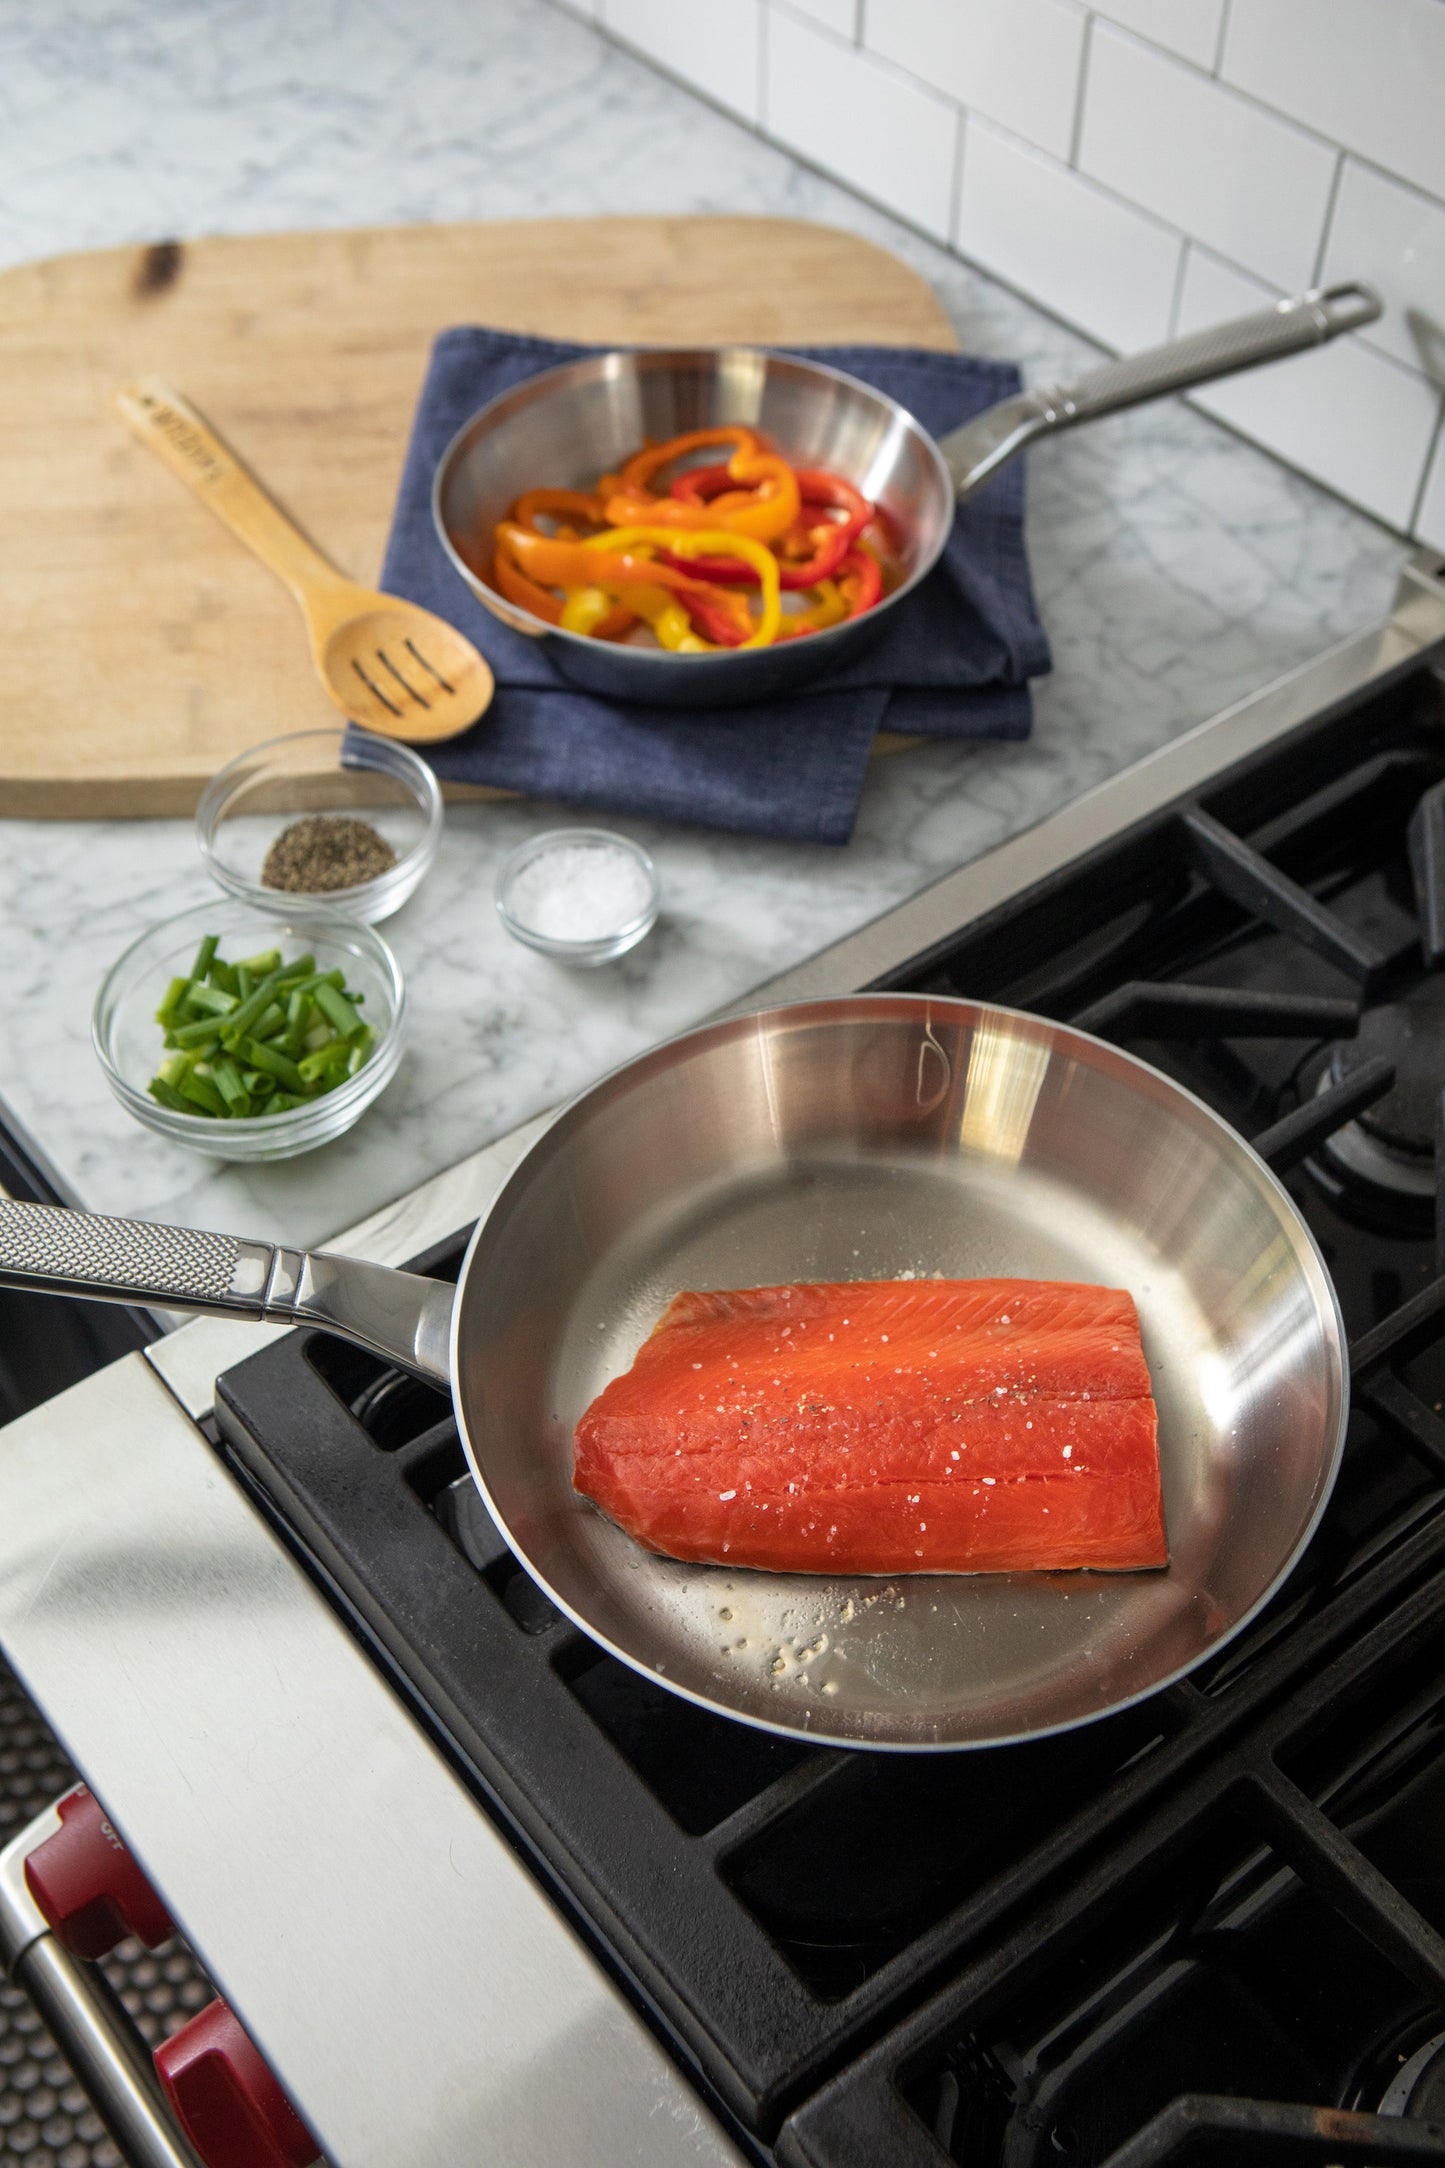 8-Inch Fry Pan – Saveur Selects